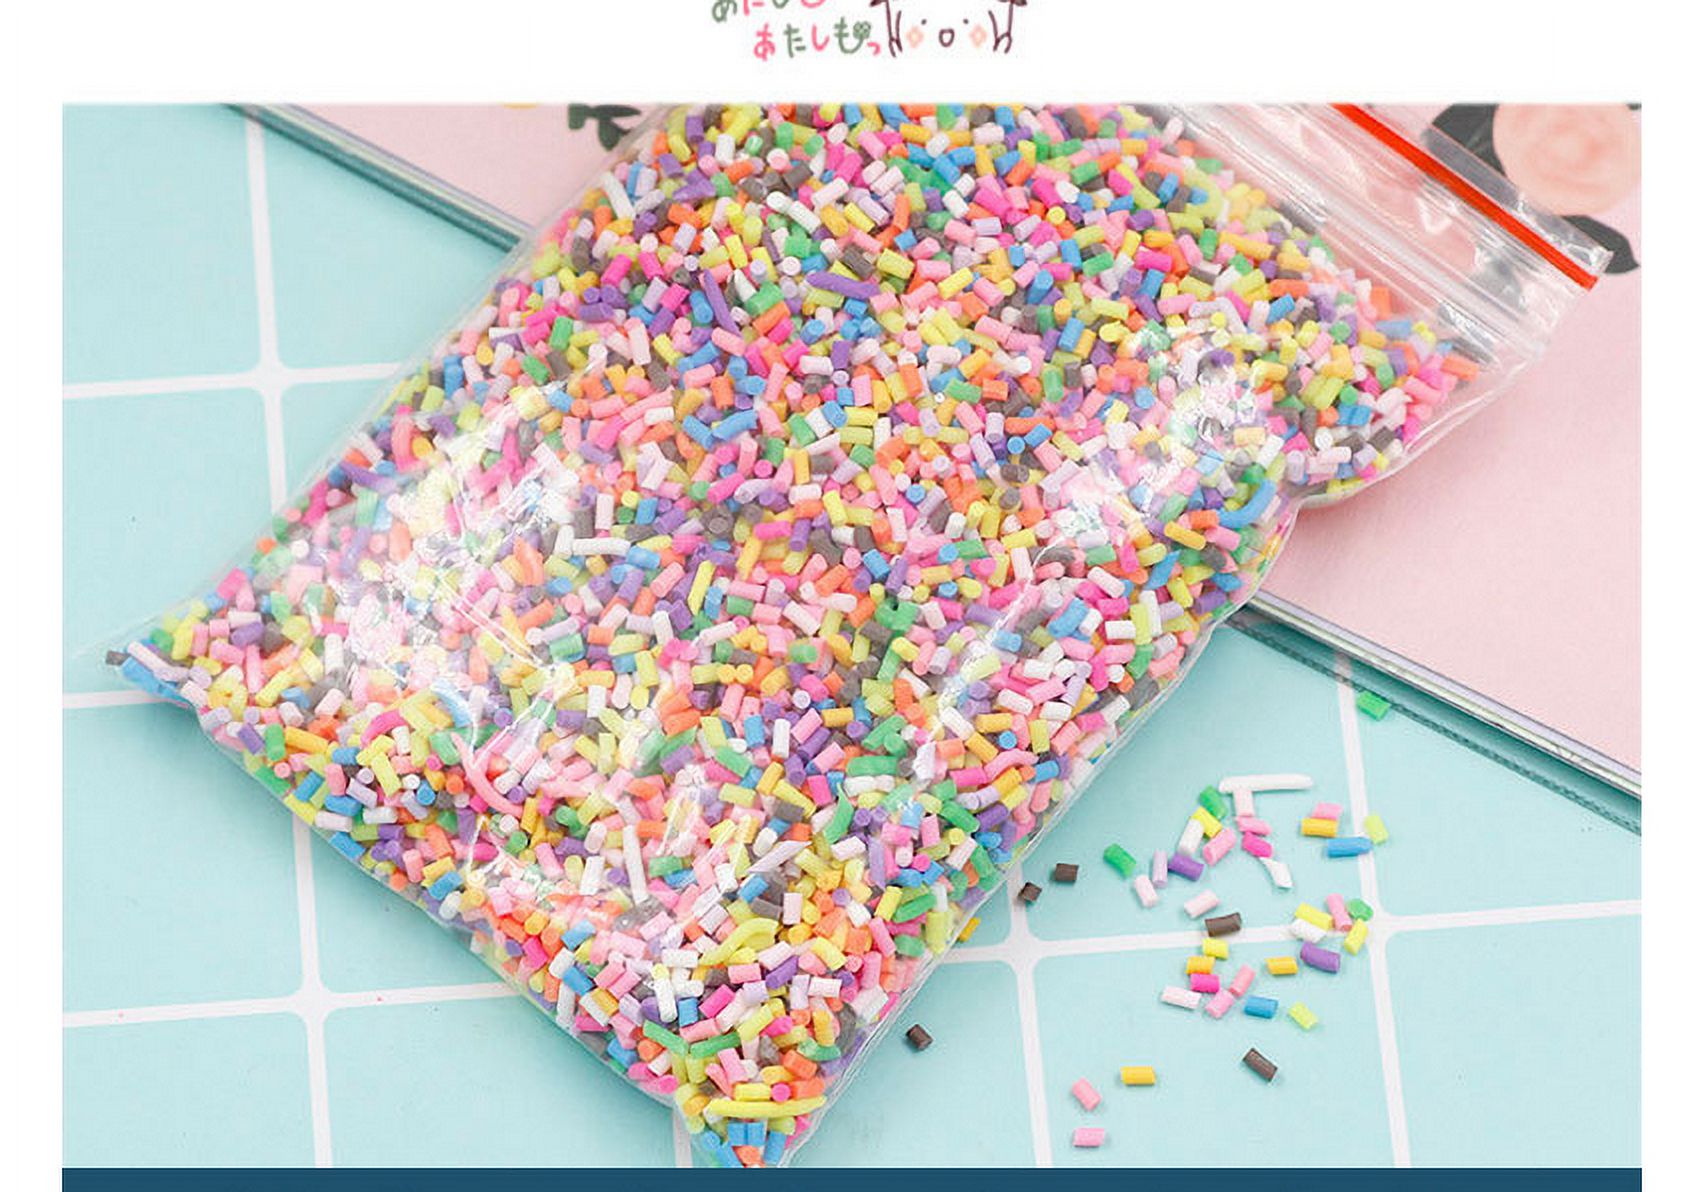 100g Clay Polymer DIY Fake Candy Sweets Sprinkle Sugar Decorations for Cake Fake Dessert Simulation Food Doll House, Other